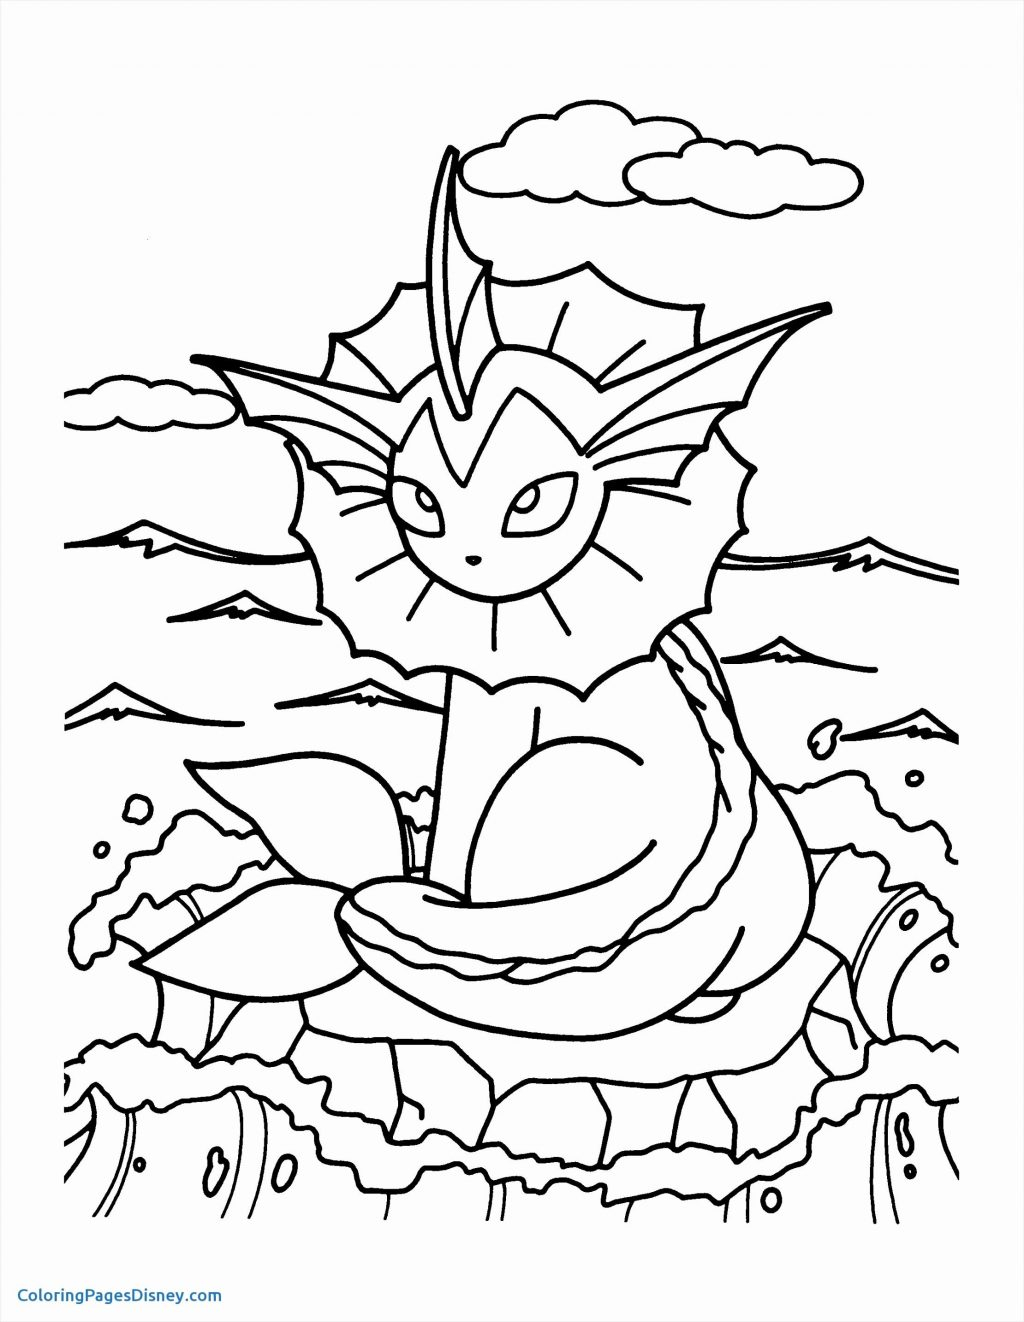 Iguana Coloring Page Coloring Page Coloring Page Printable Pages Disney Lovely Iguana